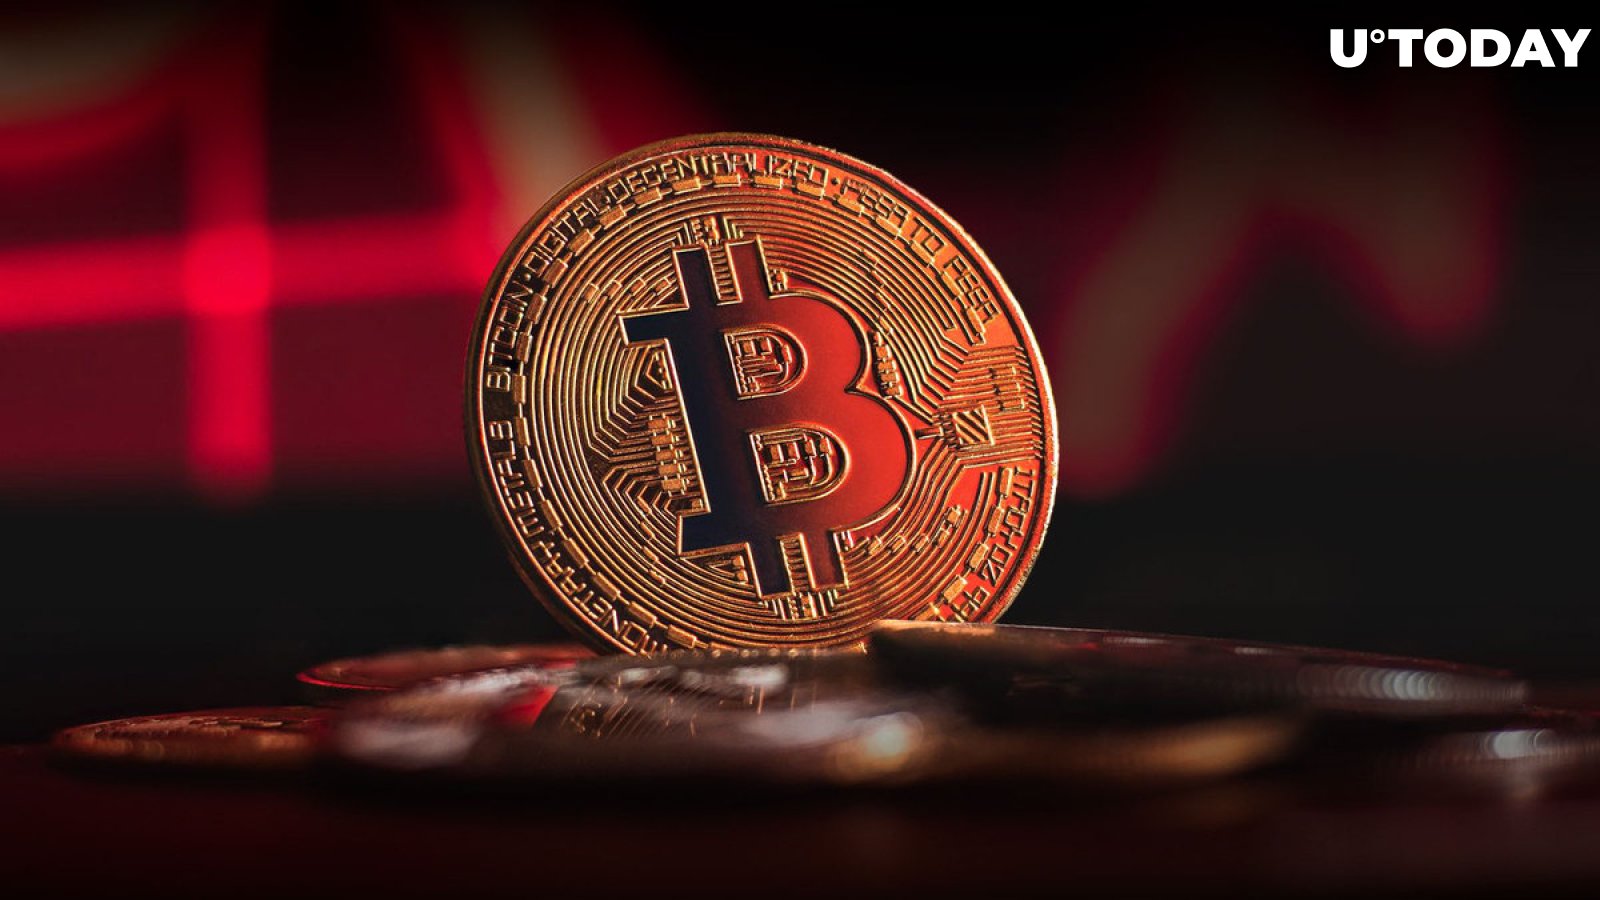 Bitcoin Holder Count Faces Drastic Fall - What's Going On?